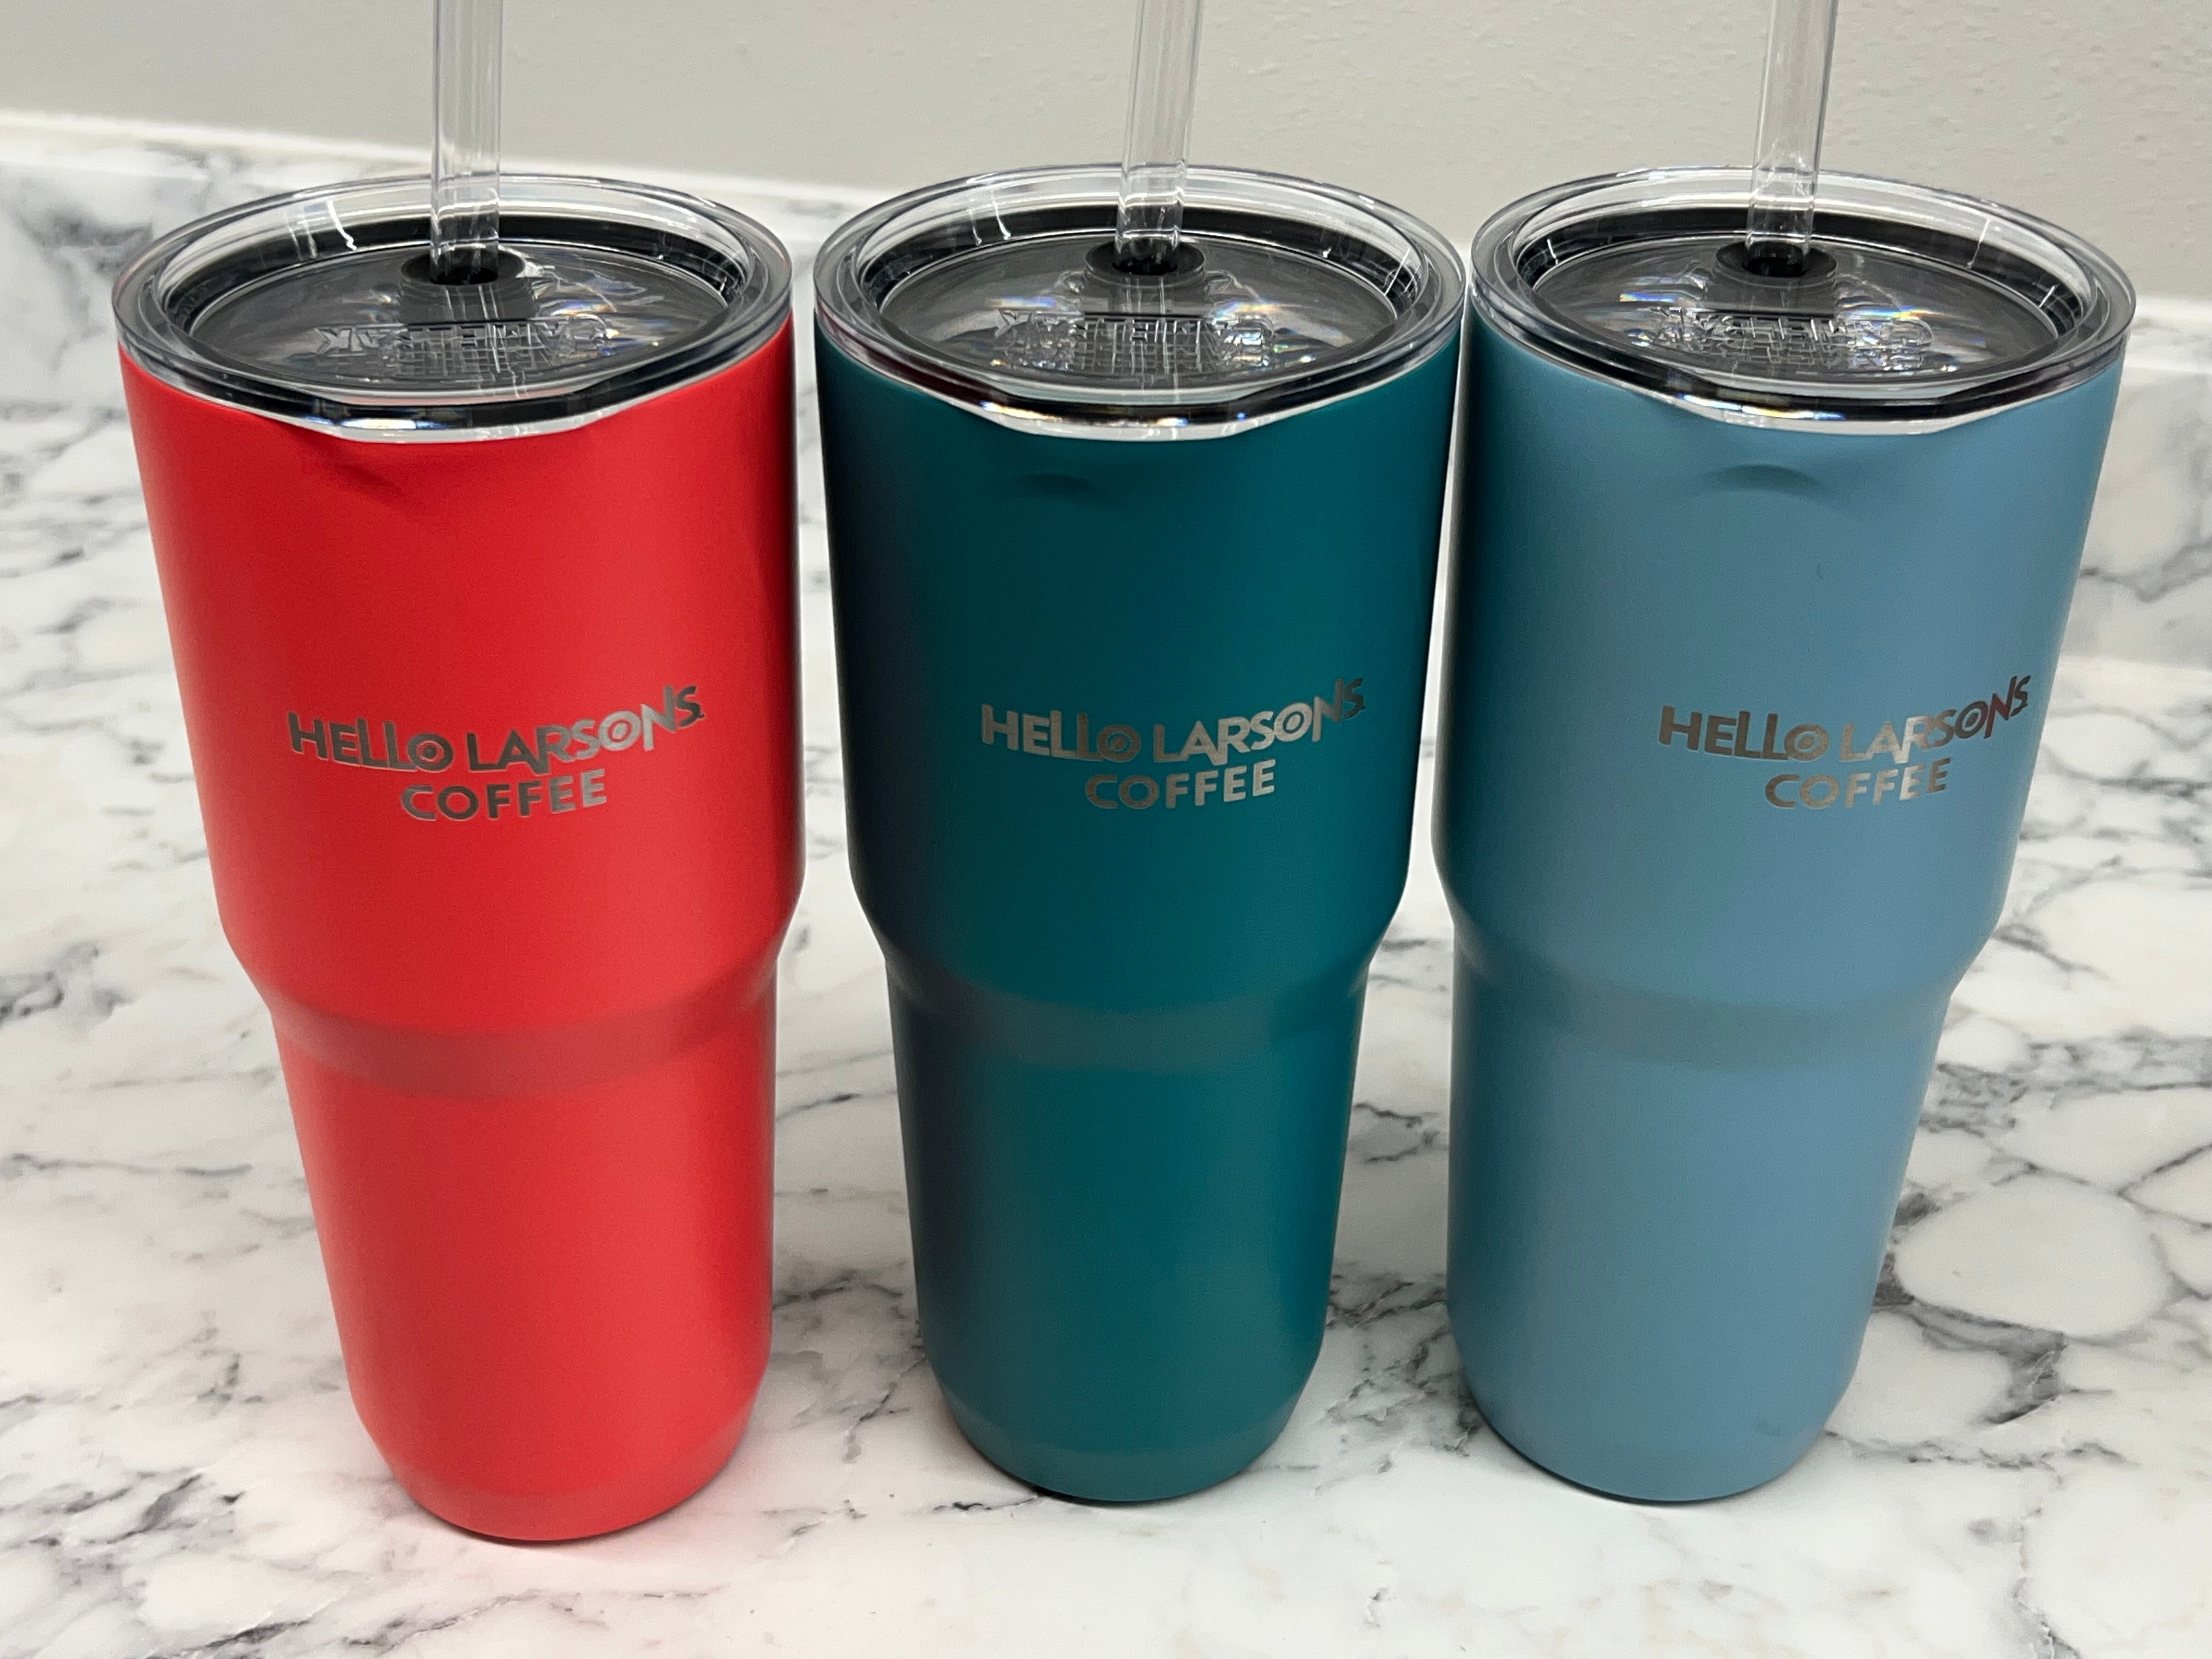 Camelbak Etched Tumbler – Ruby Coffee Roasters